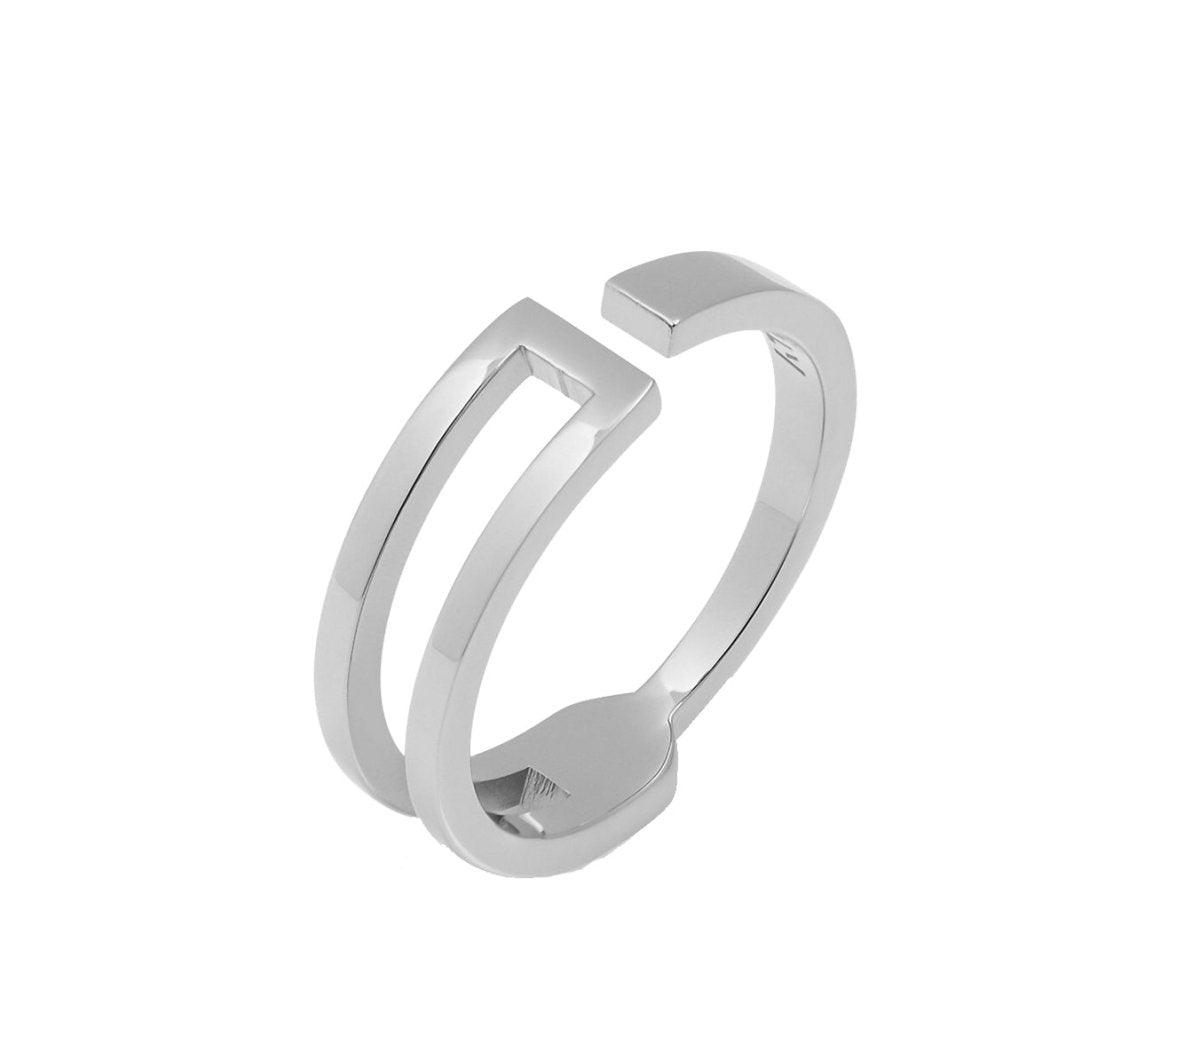 VITALY Tangent Stainless Steel Ring - SUPERCONSCIOUS BERLIN